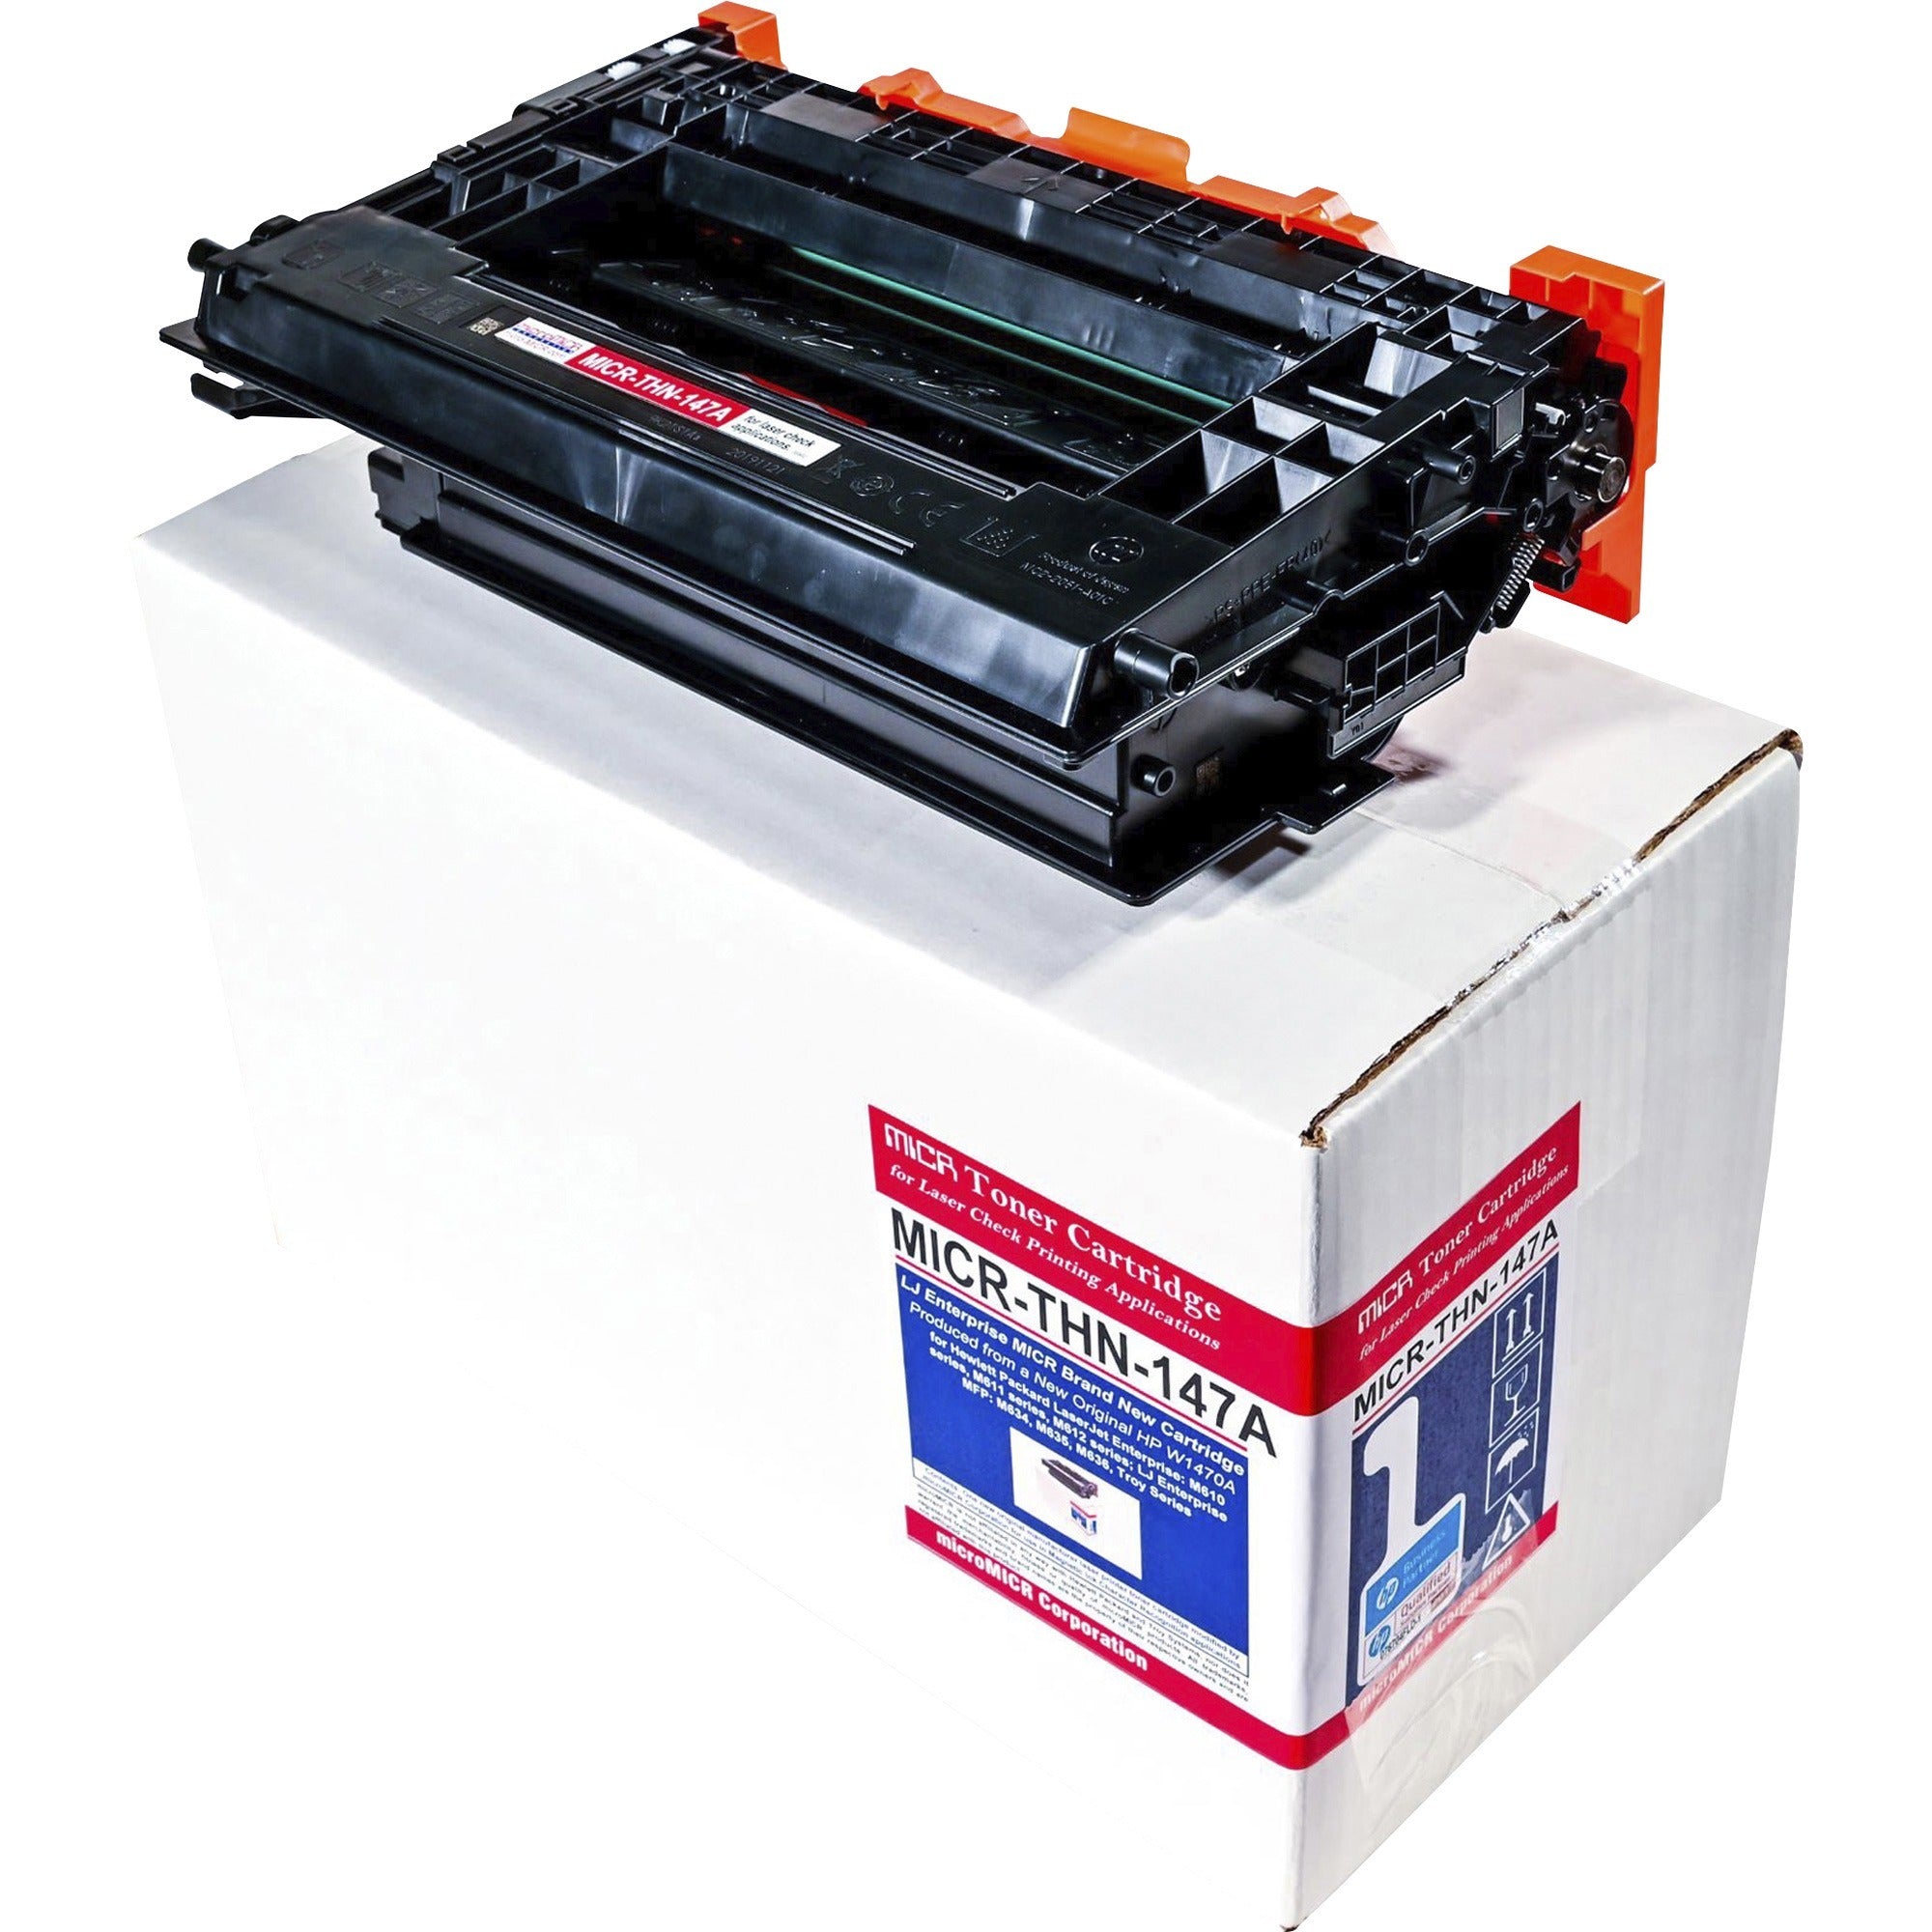 micromicr-micr-standard-yield-laser-toner-cartridge-alternative-for-hp-147a-black-1-each-10500-pages_mcmmicrthn147 - 1